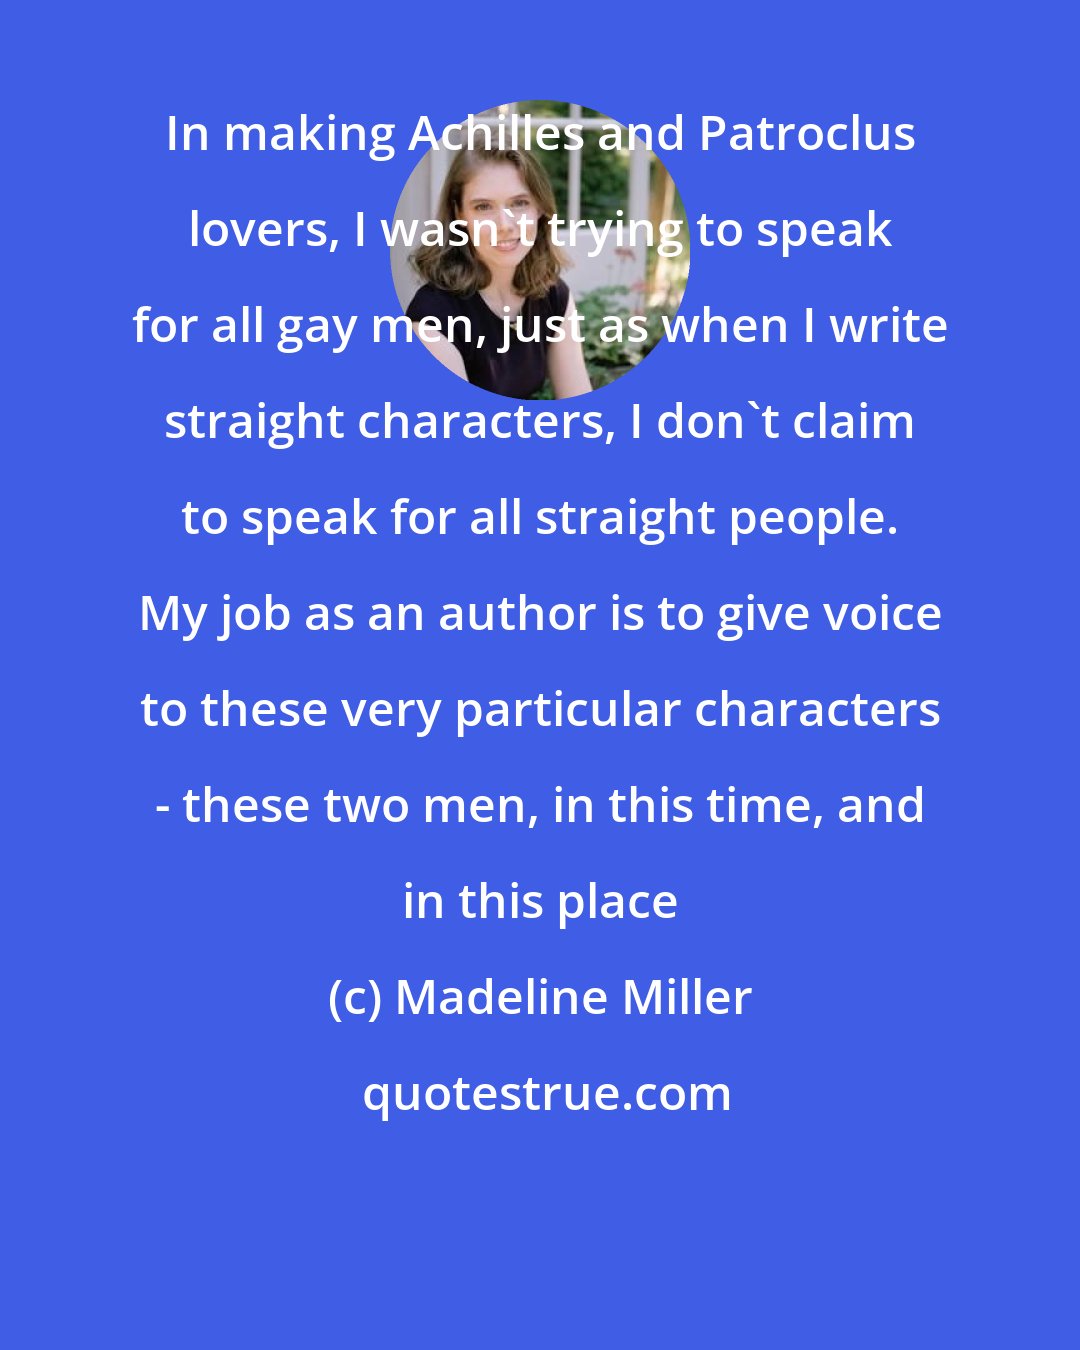 Madeline Miller: In making Achilles and Patroclus lovers, I wasn't trying to speak for all gay men, just as when I write straight characters, I don't claim to speak for all straight people. My job as an author is to give voice to these very particular characters - these two men, in this time, and in this place